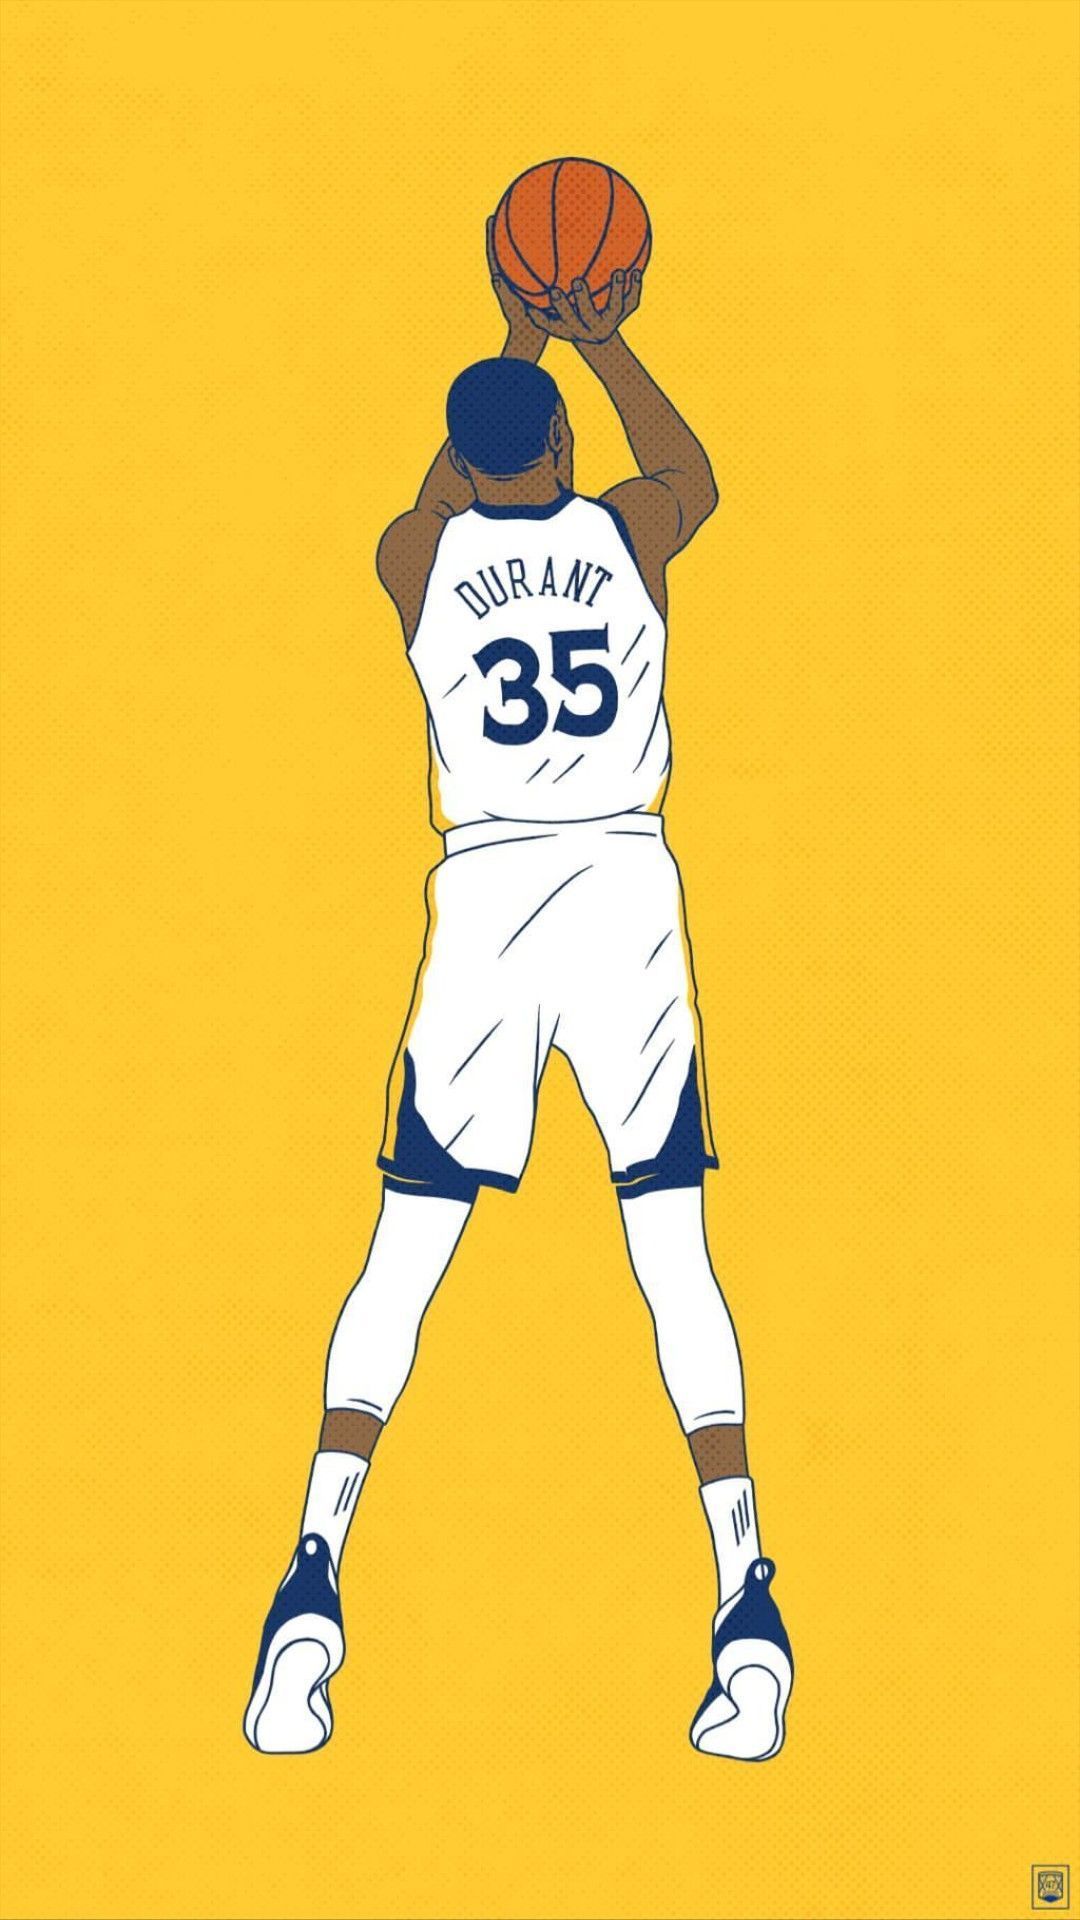 Kevin Durant Wallpaper Discover more cool, Desktop, dunk, Iphone, Logo  wallpapers.